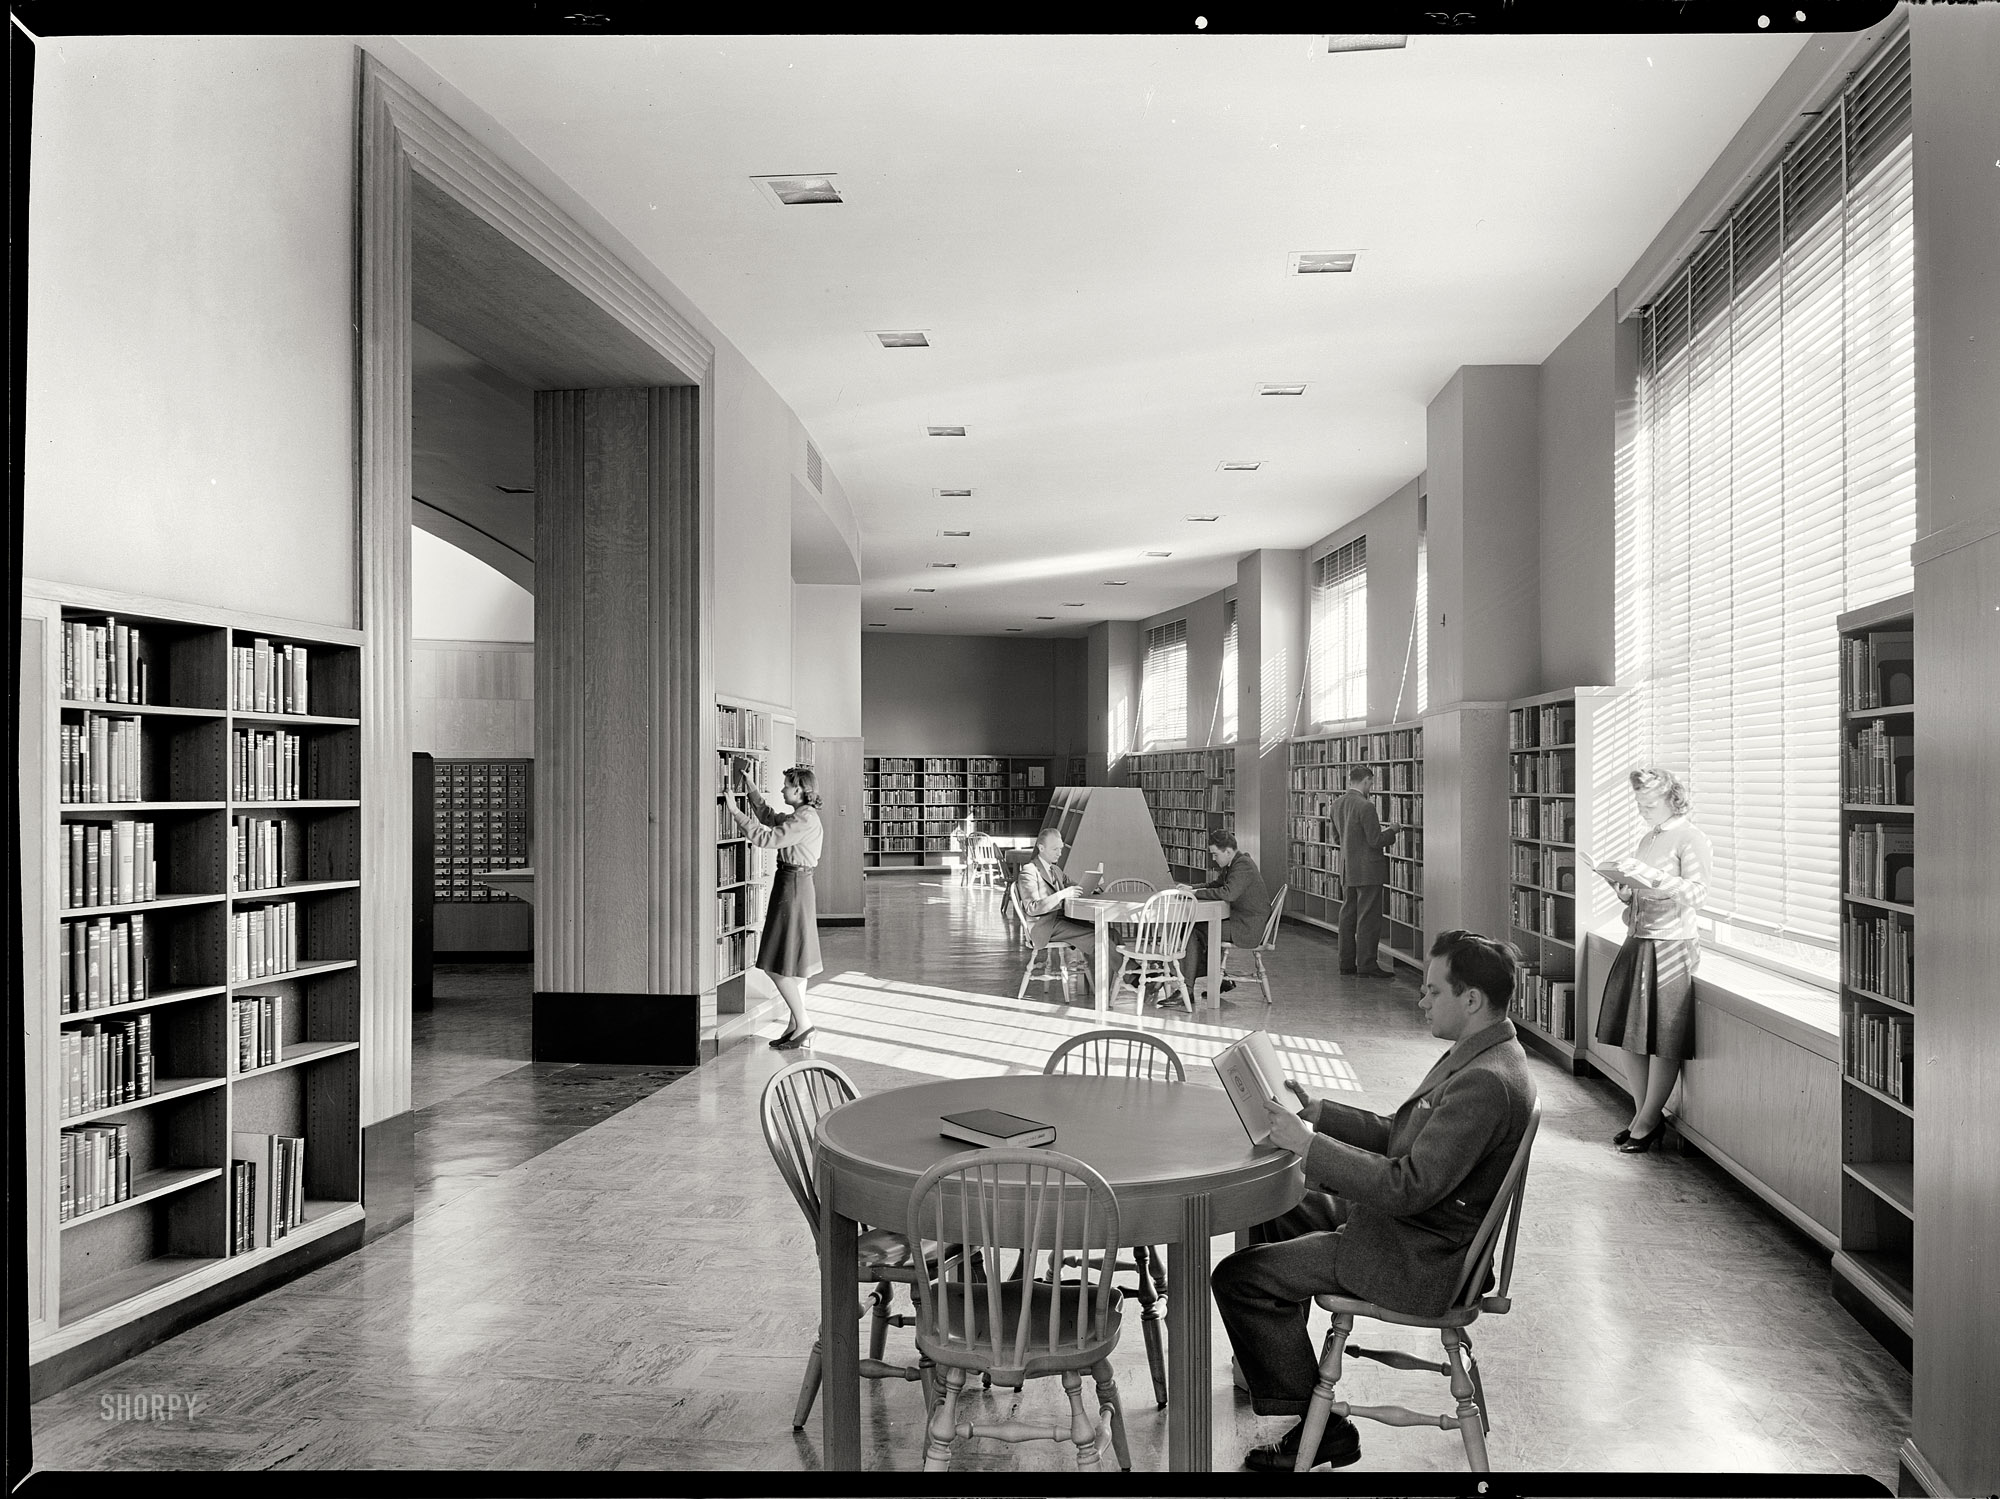 January 21, 1941. "Brooklyn Public Library, Prospect Park Plaza, New York. Popular Room." 5x7 safety negative by Gottscho-Schleisner. View full size.